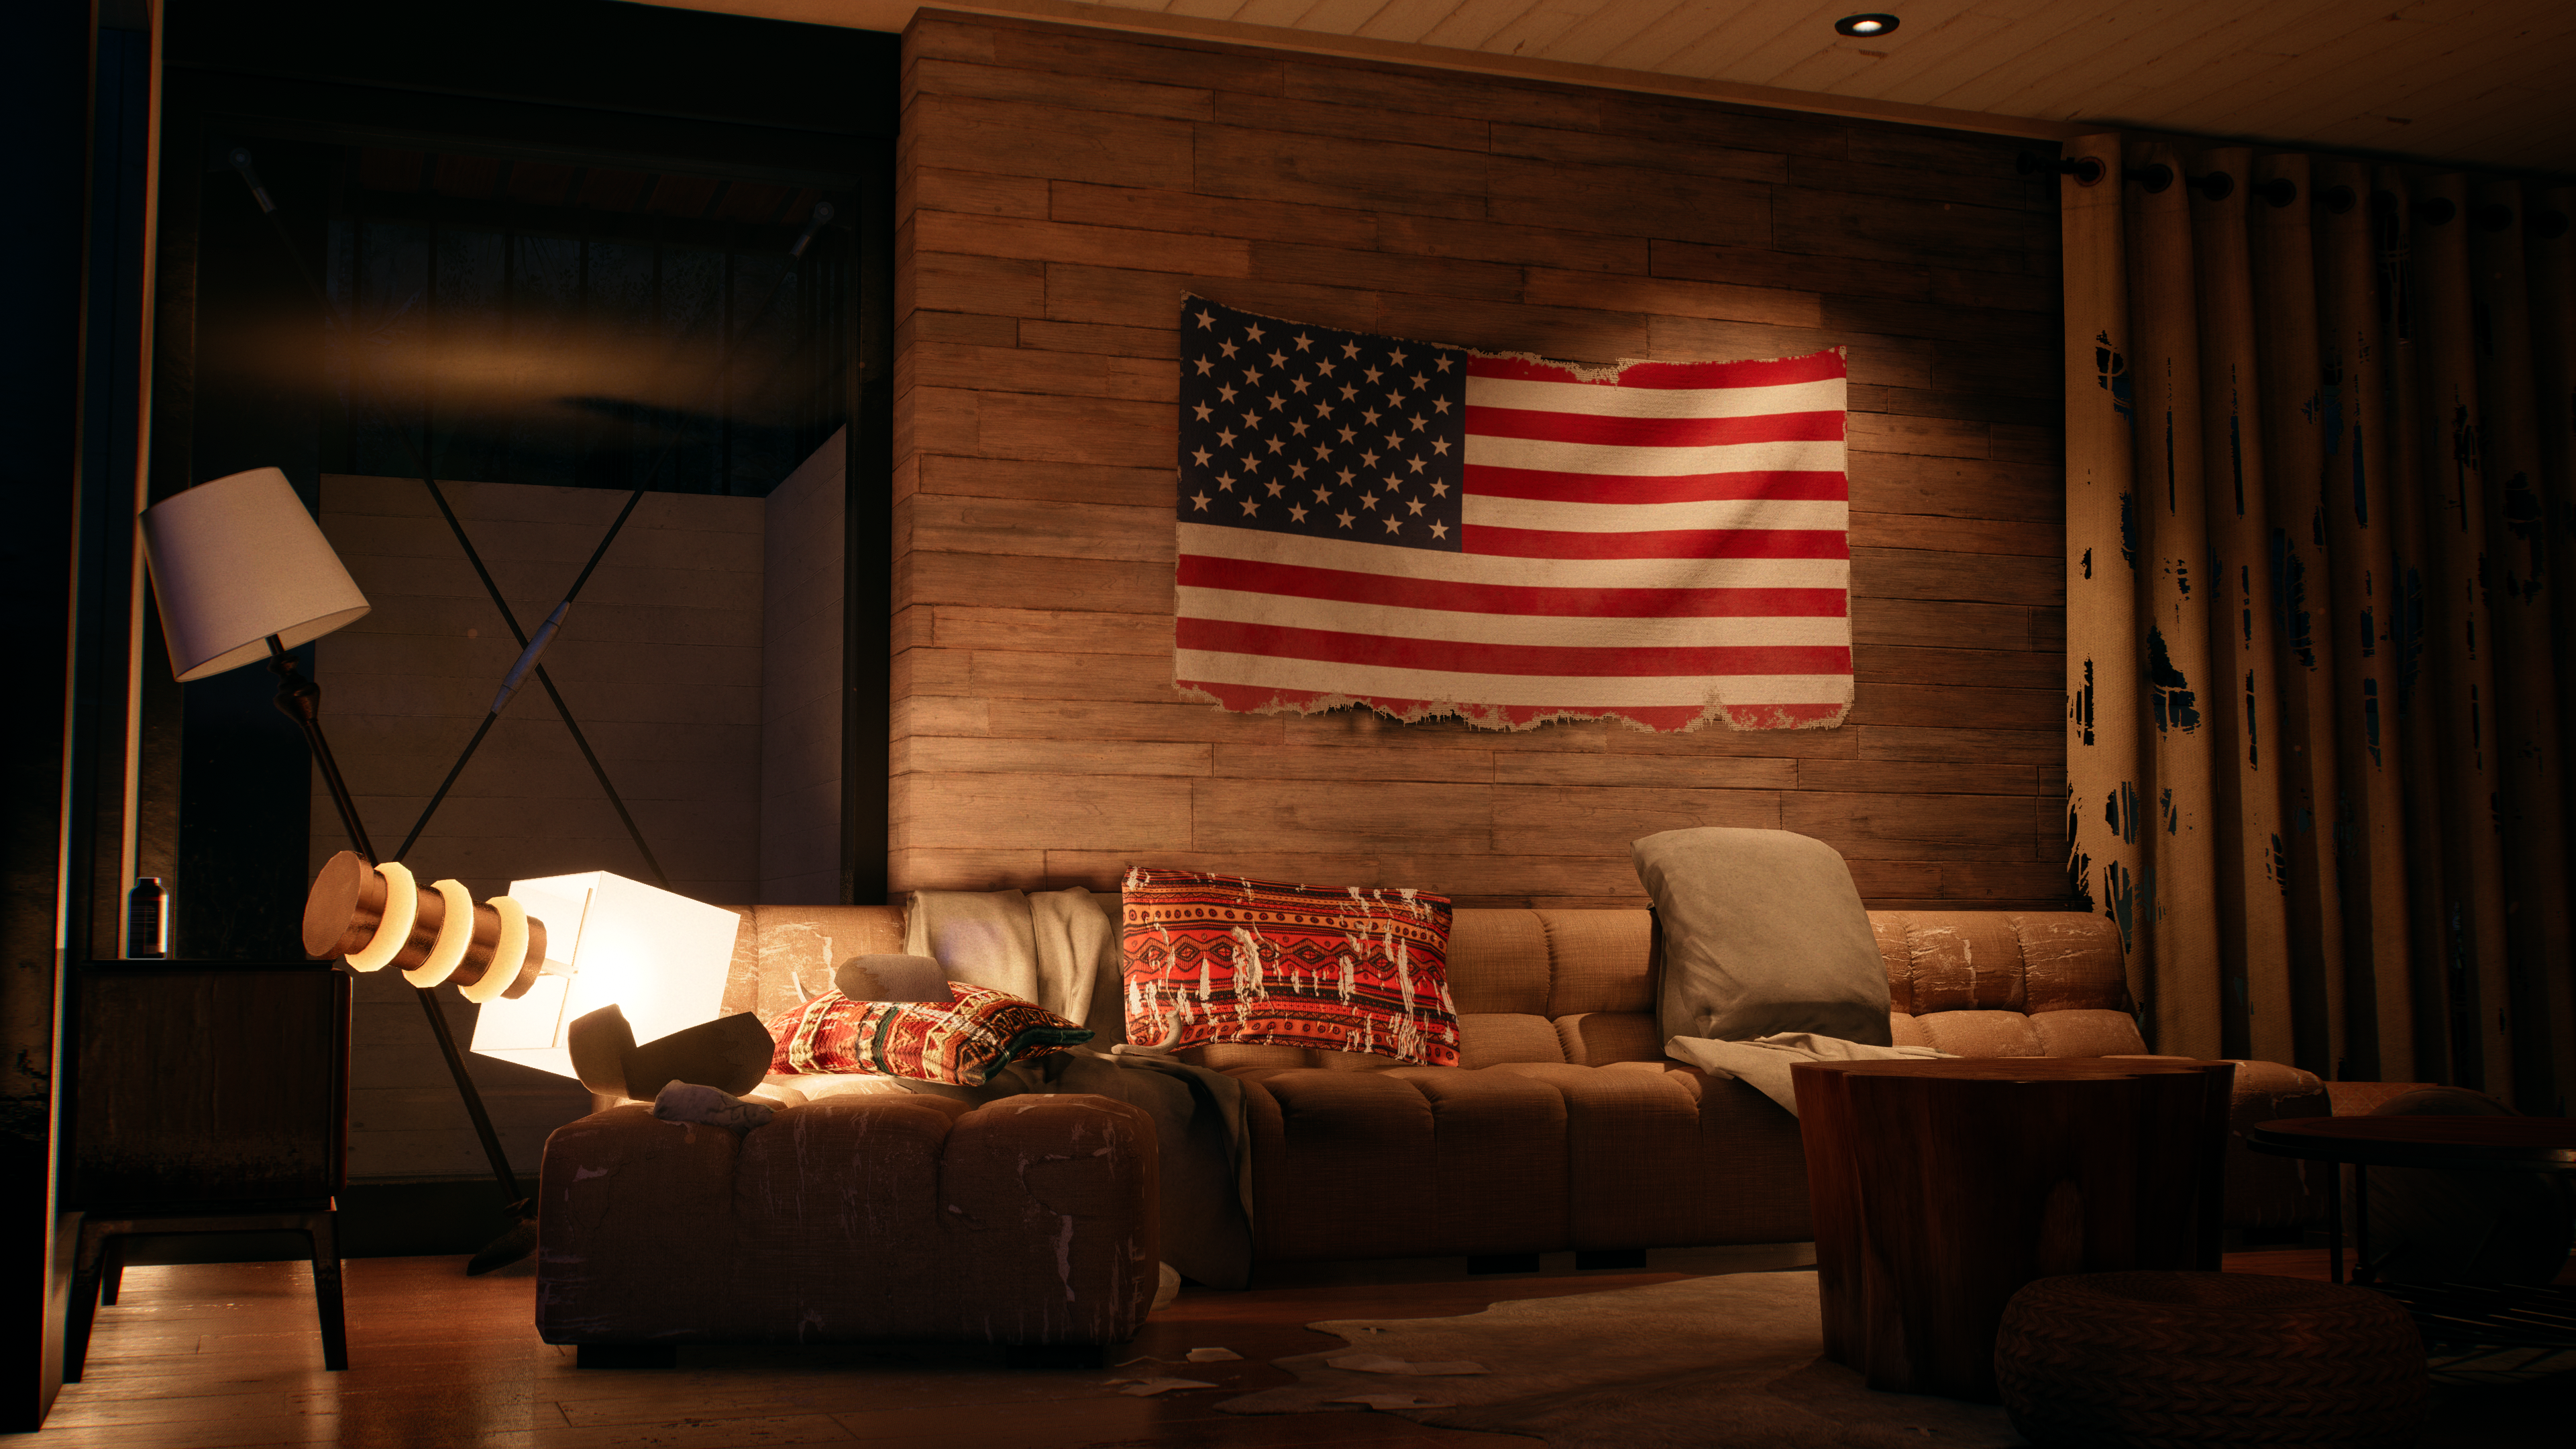 Dead Island 2 Nvidia RTX Video Games CGi Flag Couch Lamp Living Rooms Interior Furnished 3840x2160